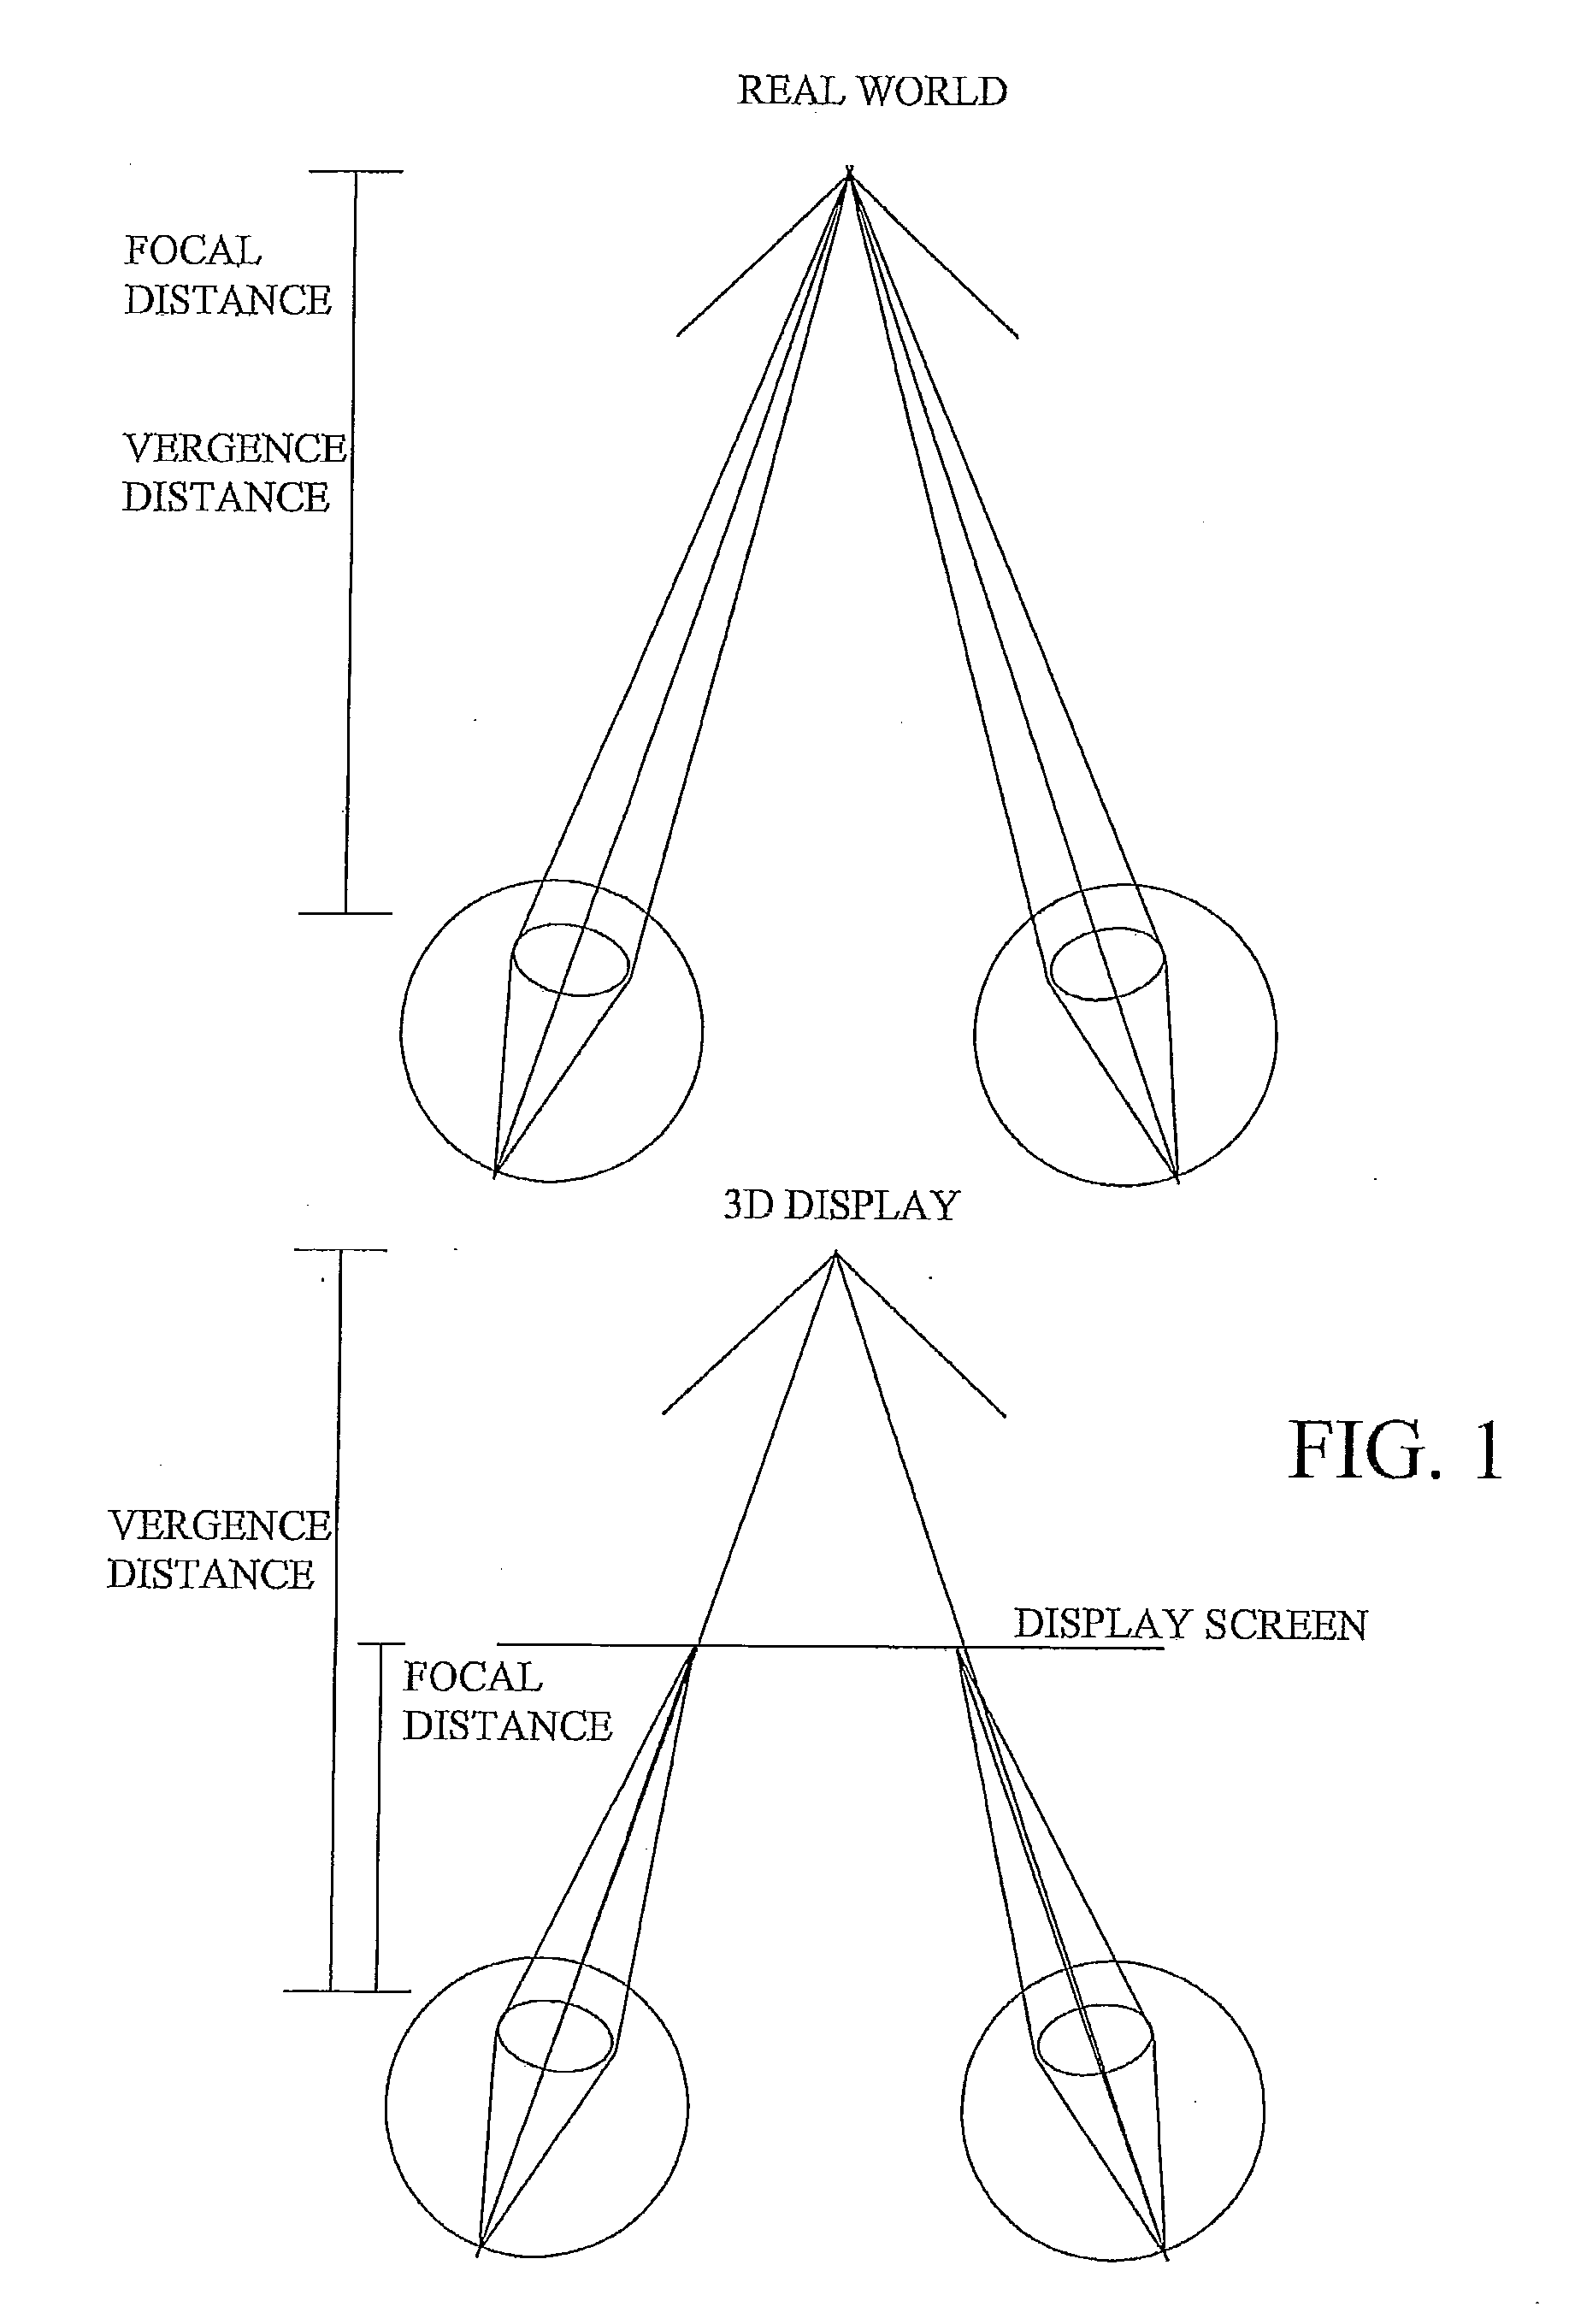 Remote user control for stereoscopic display